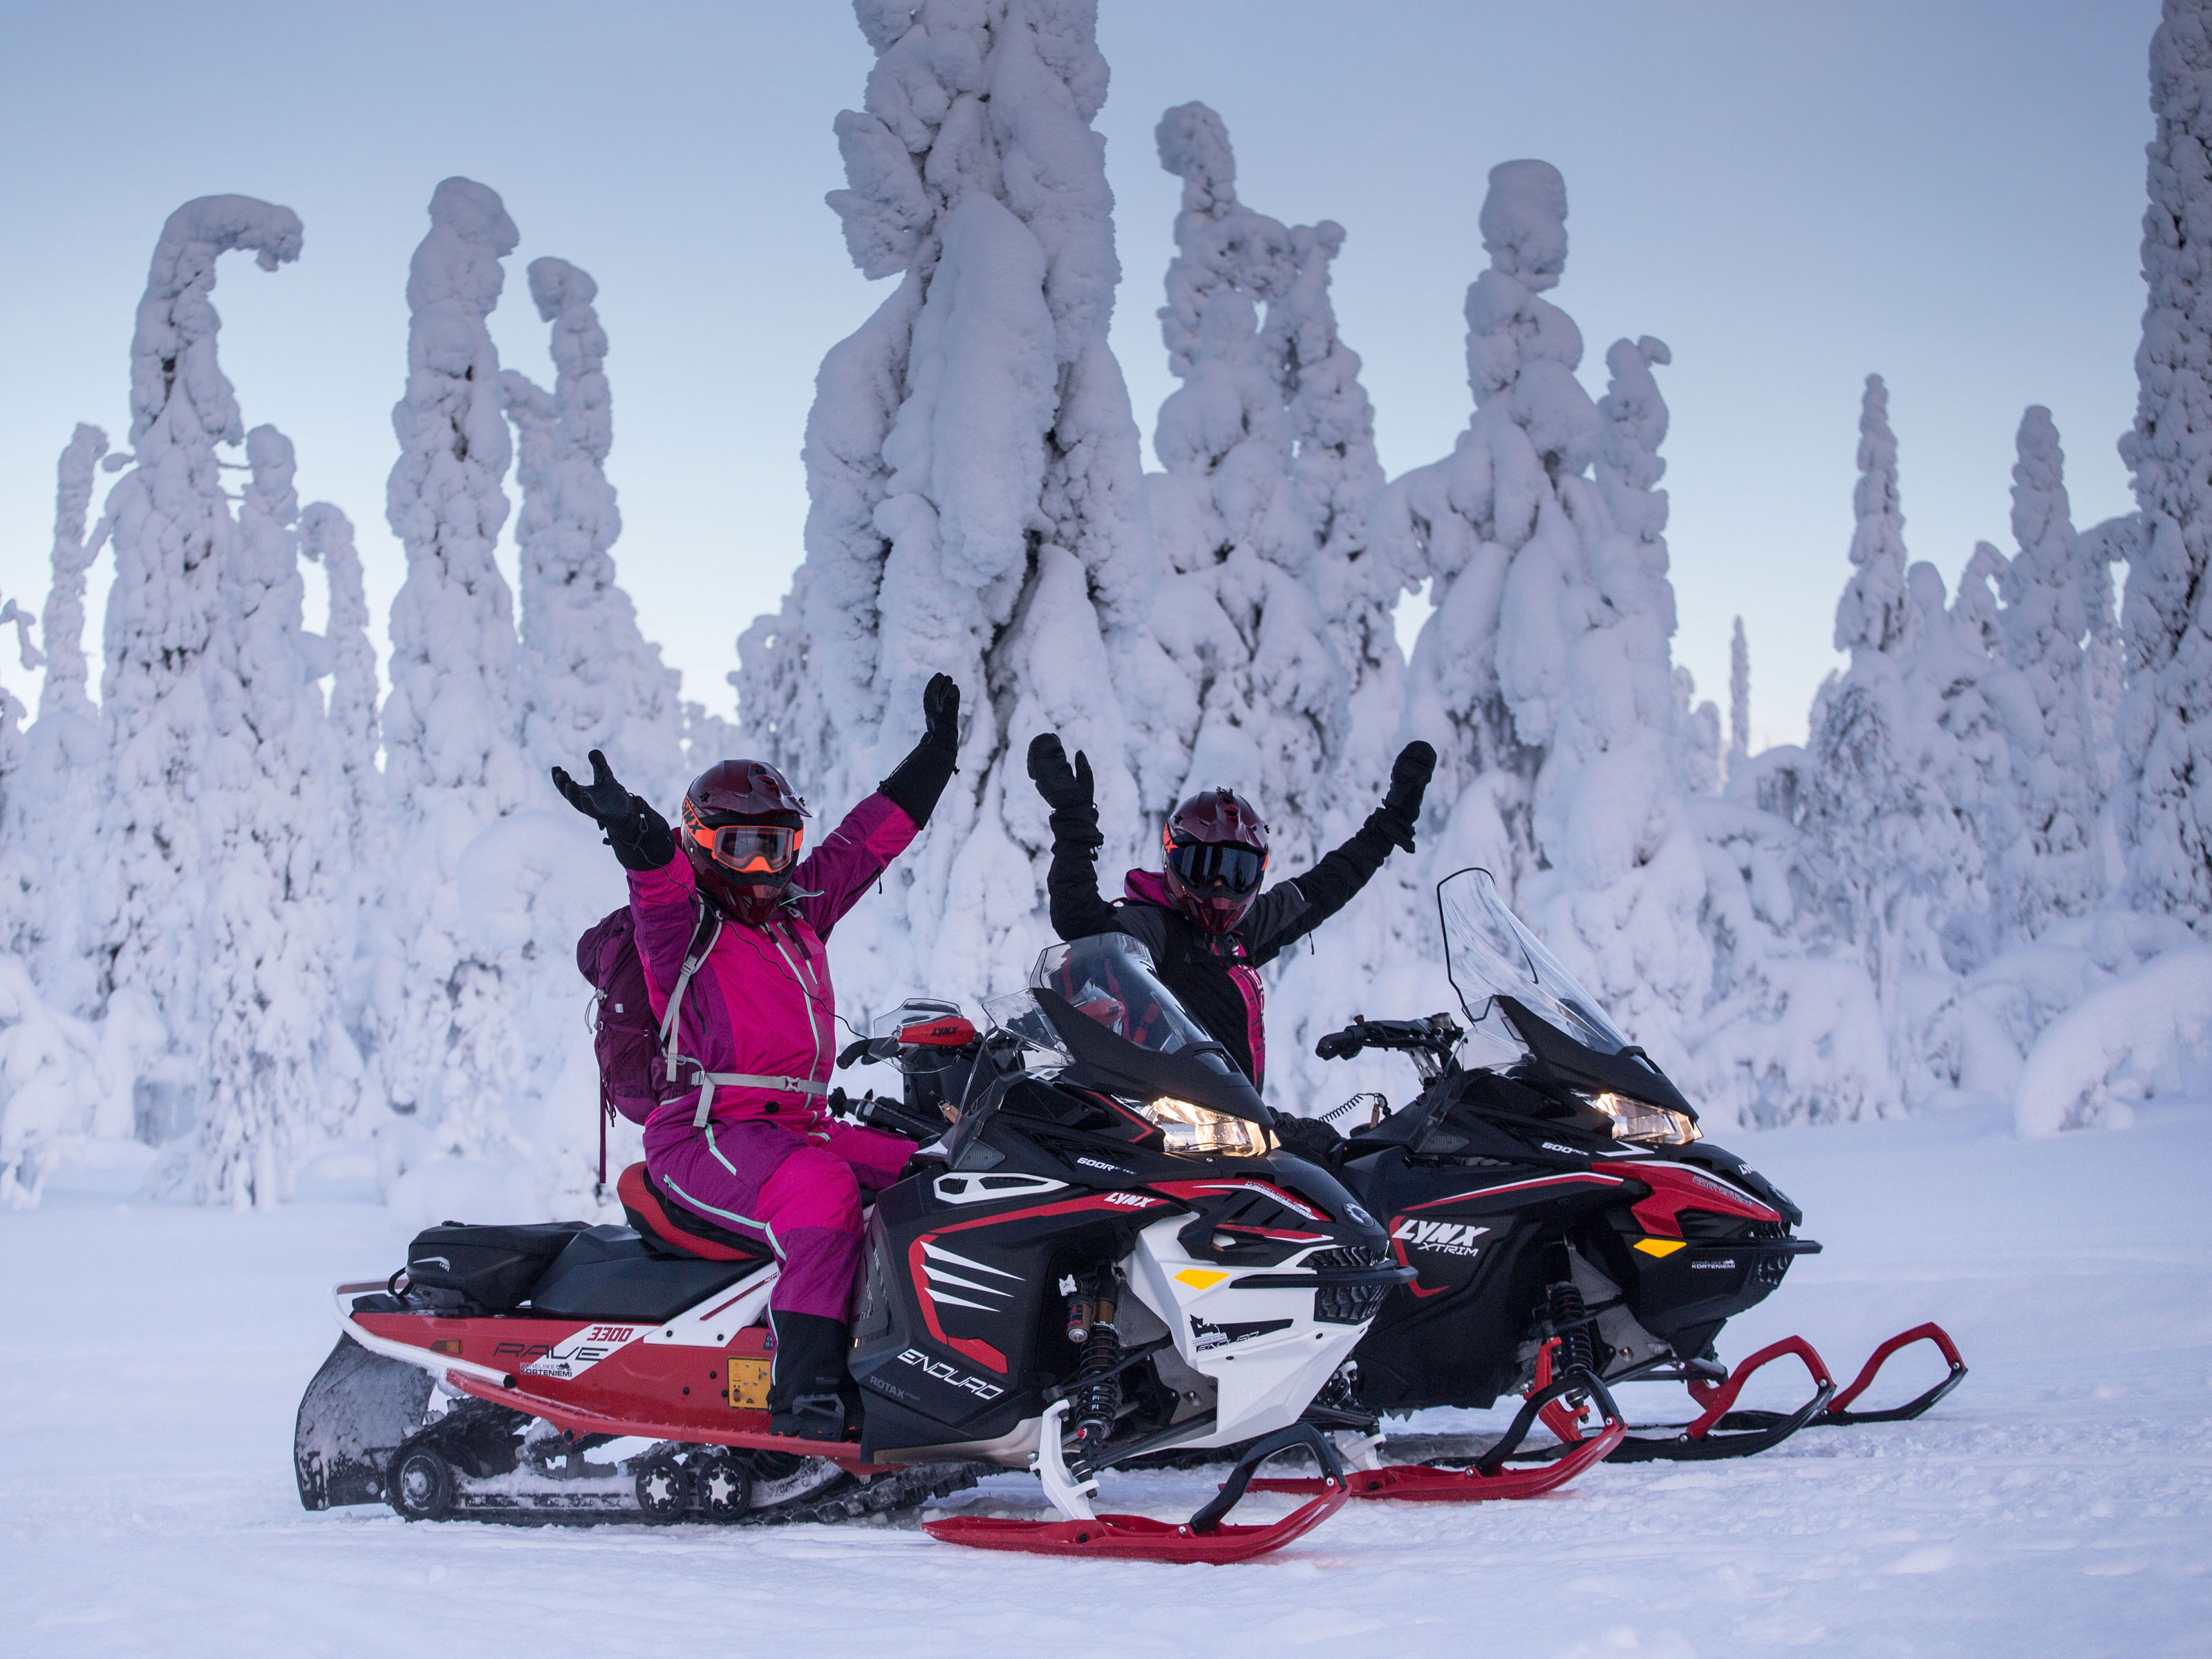 Snowmobiling brought us together